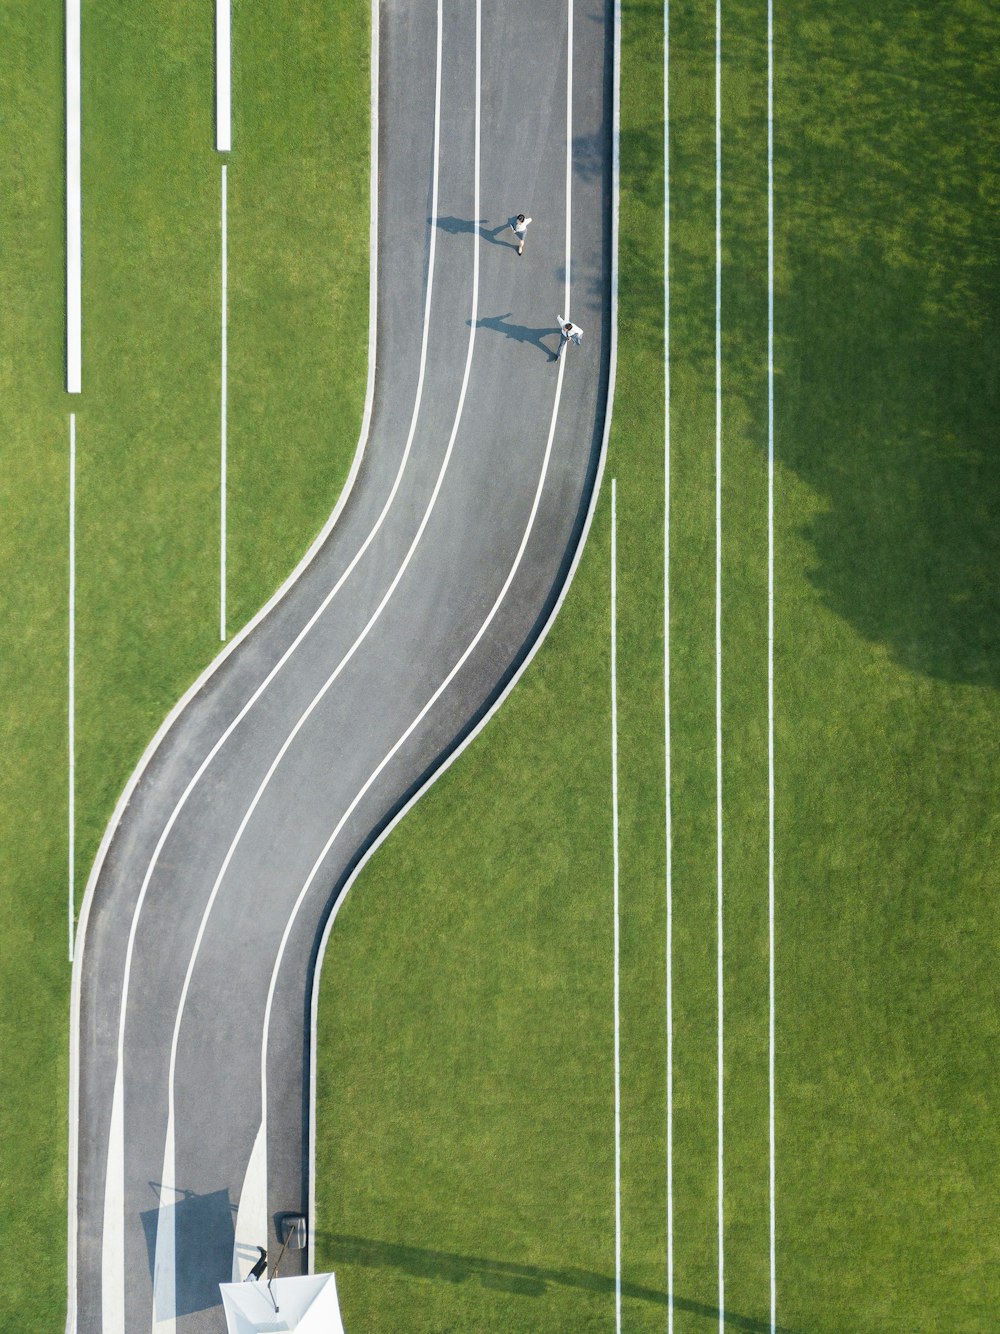 aerial photography of two person running on road during daytime